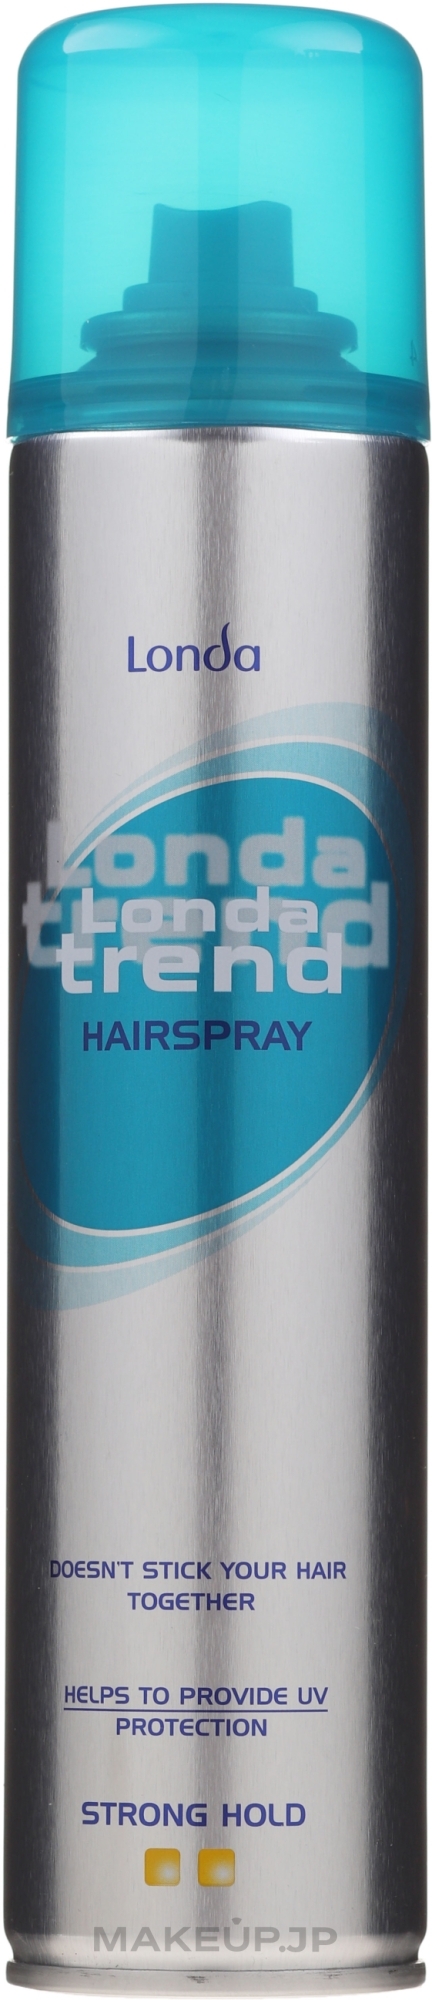 Londatrend Strong Hold Hair Spray | Makeup.jp